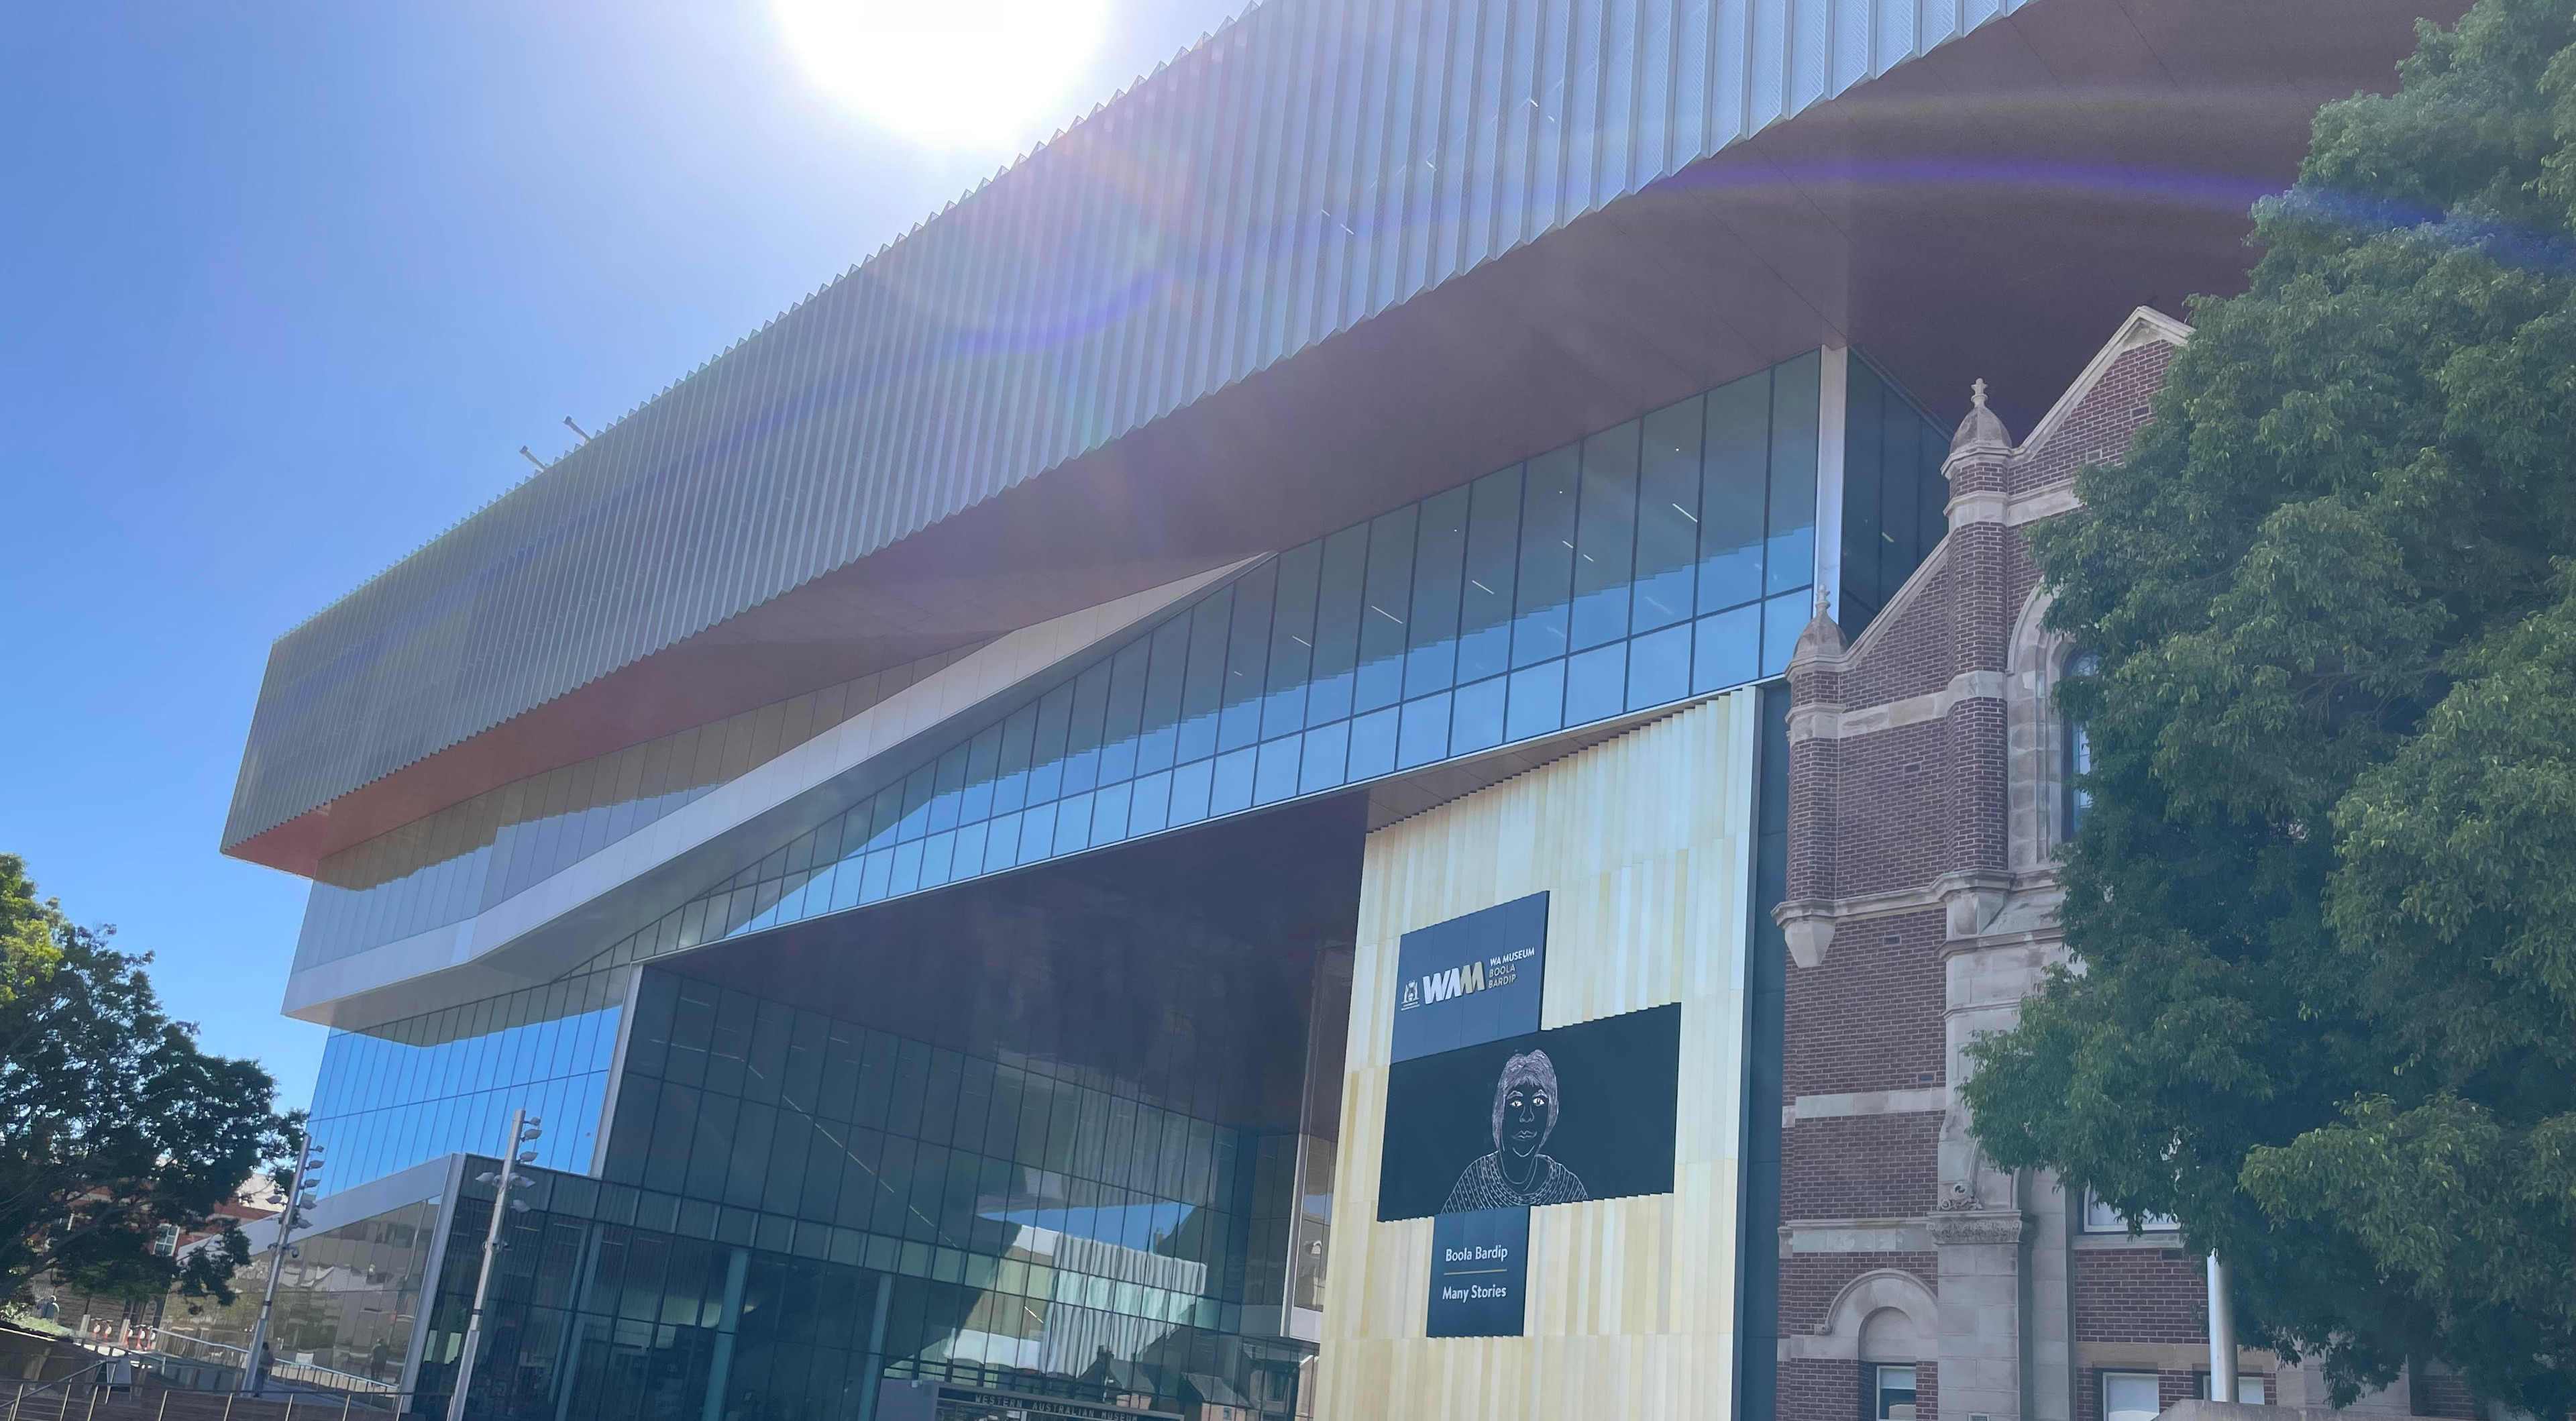 WAmuseum in Perth, Australia where the 3D printed models are on display